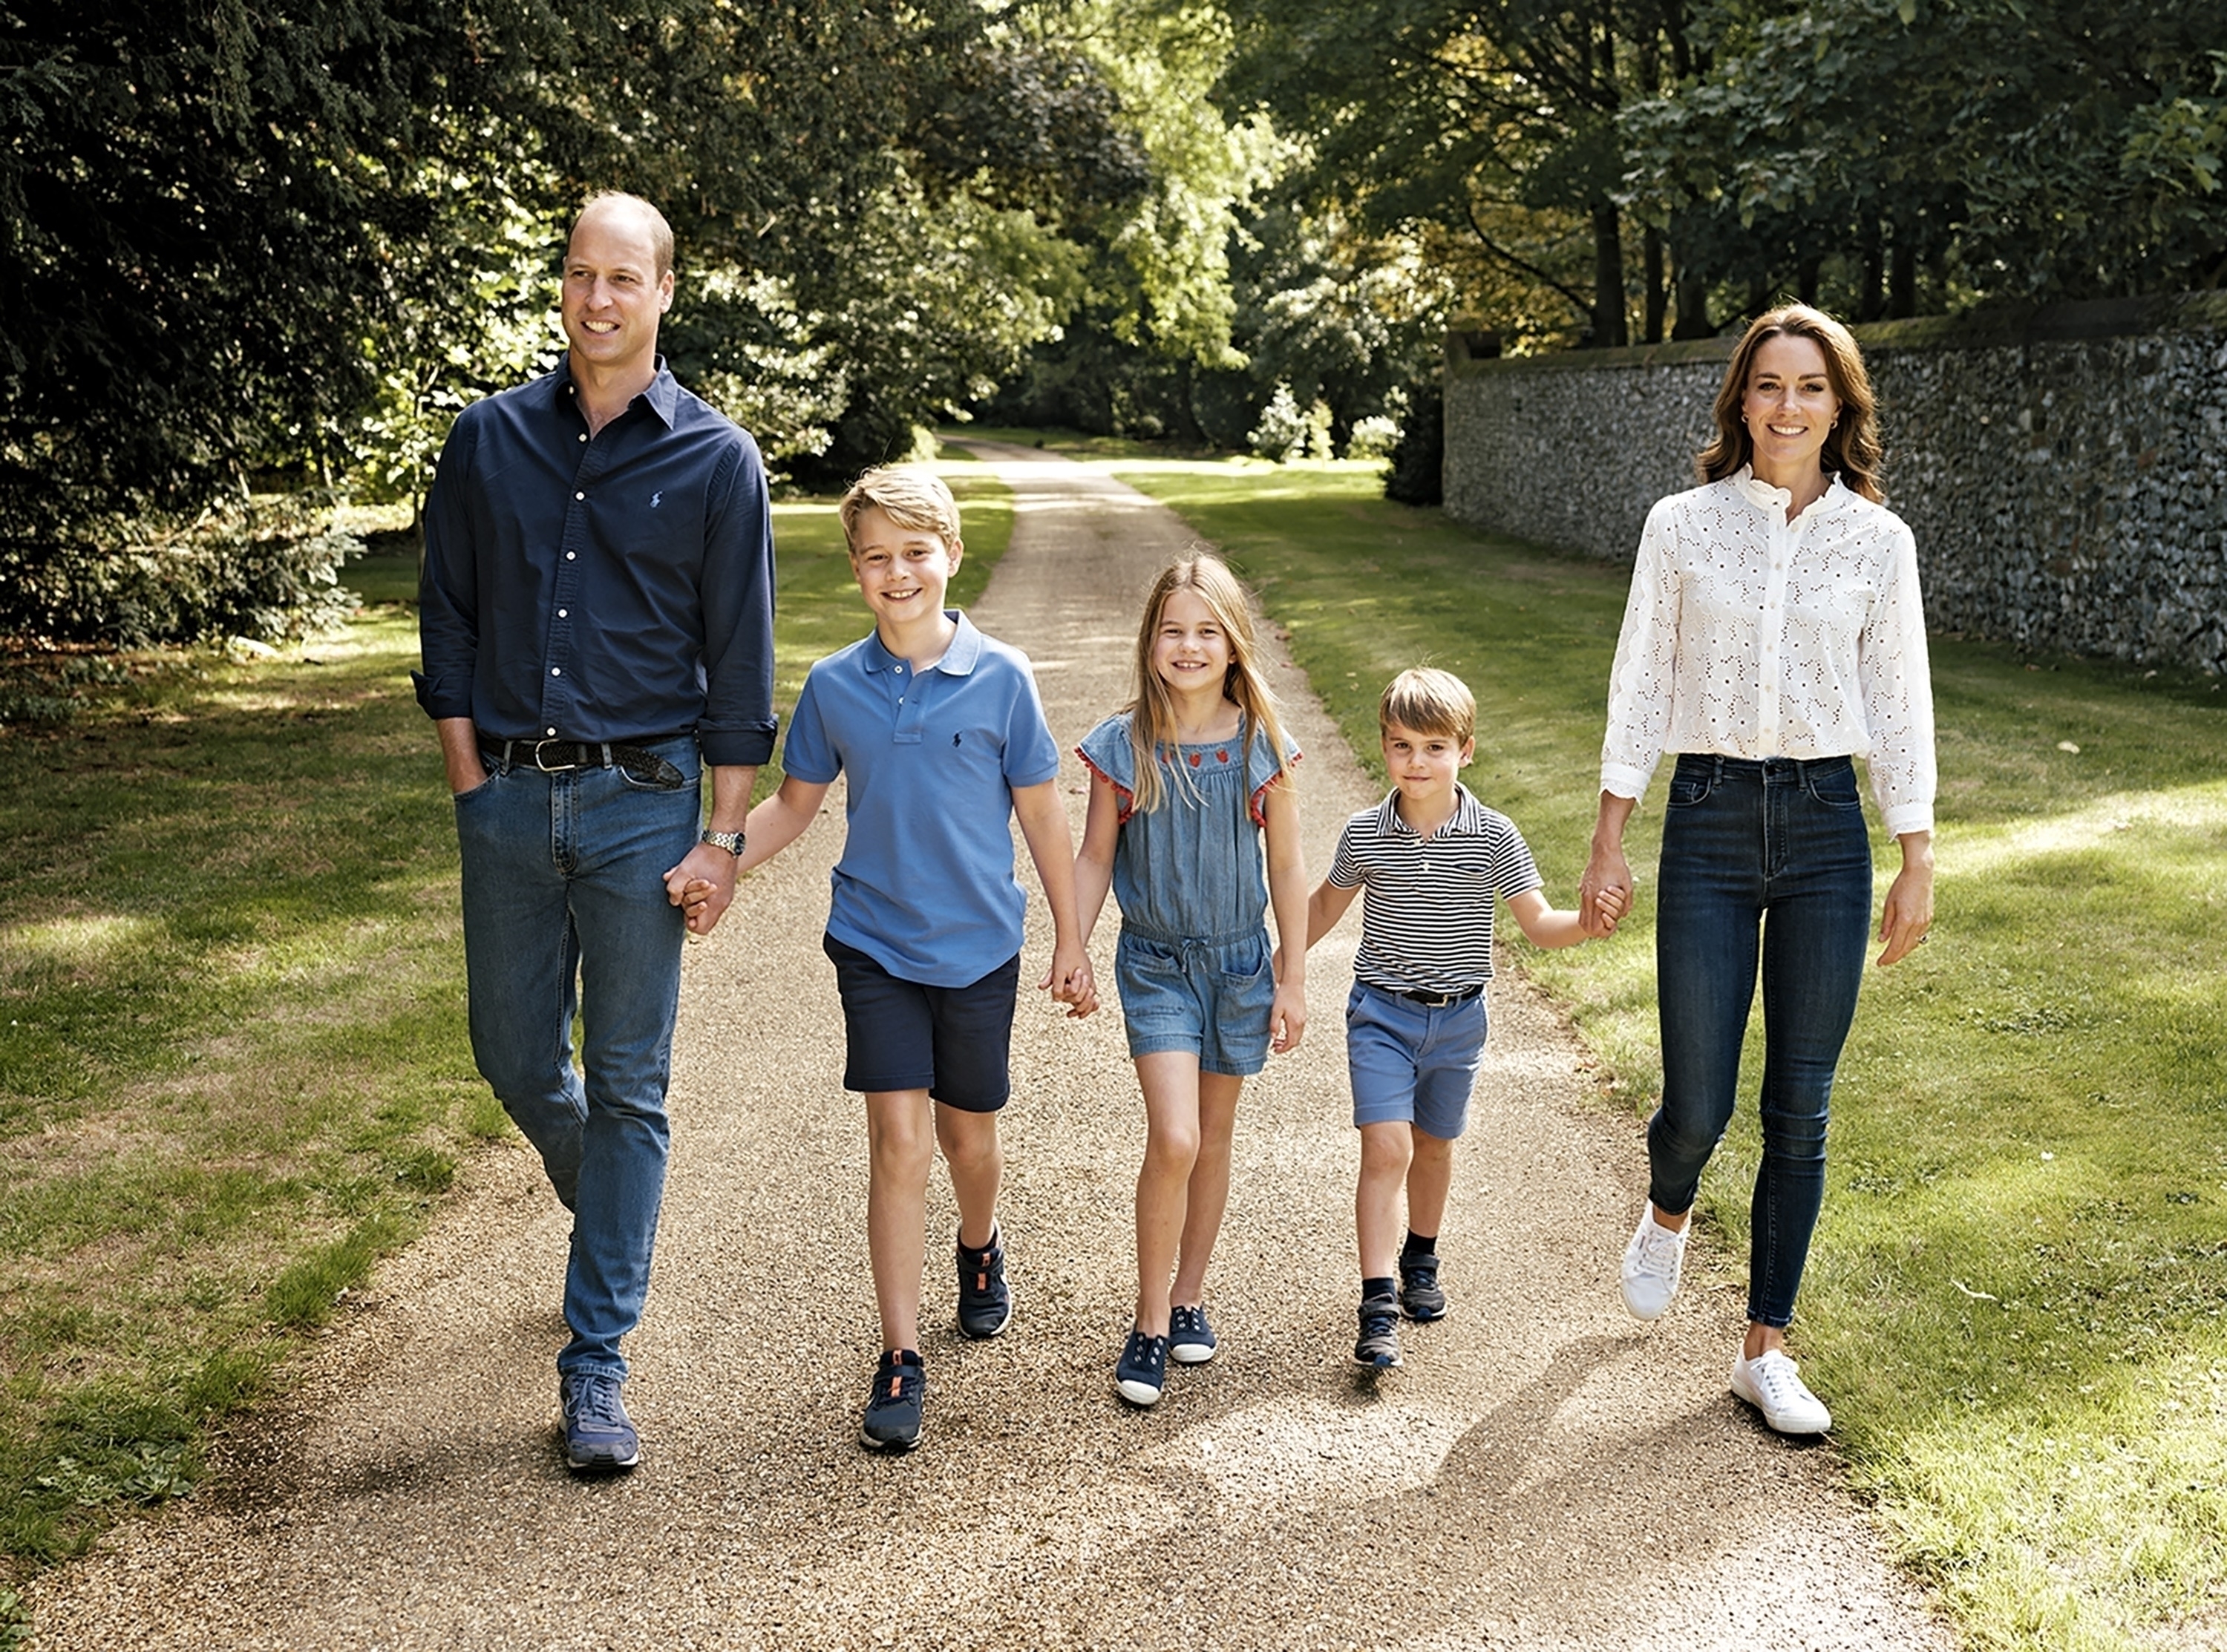 <p><span>On Dec. 13, 2022, the Prince and Princess of Wales released their 2022 Christmas card photo, which features their family -- <a href="https://www.wonderwall.com/celebrity/profiles/overview/prince-william-482.article">Prince William</a> and Princess Kate flanking their three children, Prince George, Princess Charlotte and Prince Louis -- on a walk in Norfolk, England.</span></p>